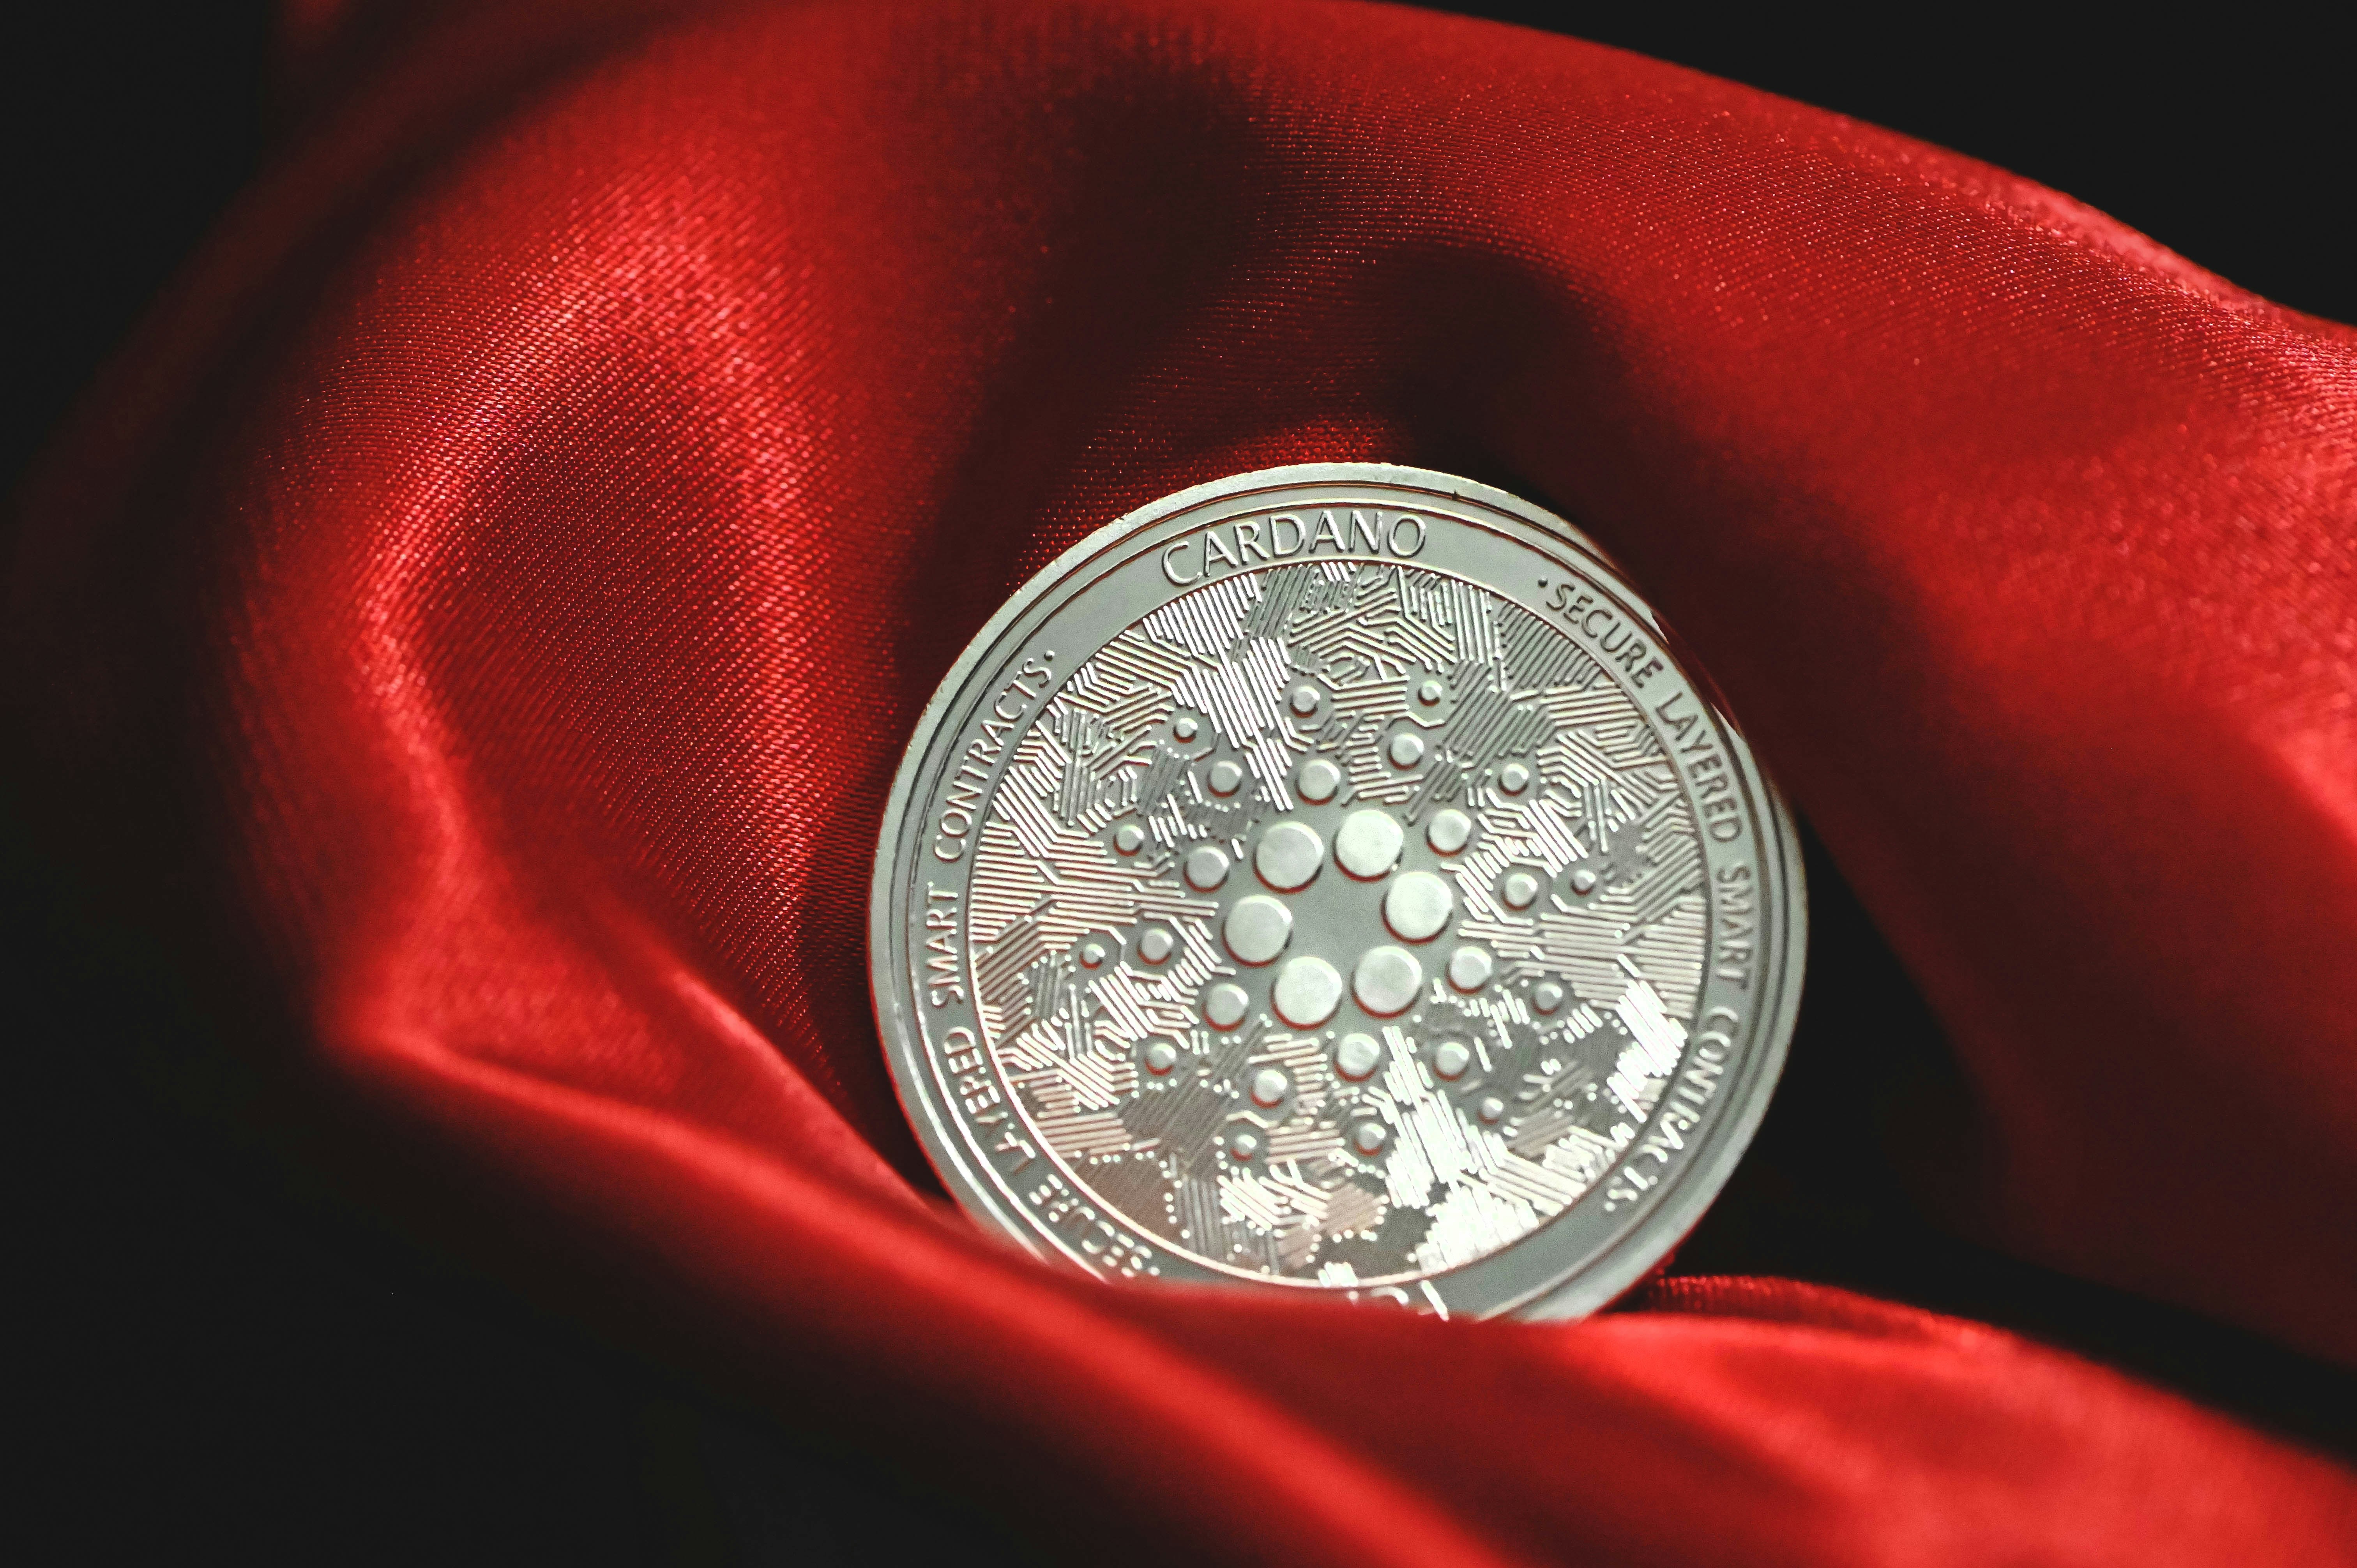 A silver Cardano coin on top of a red velvet